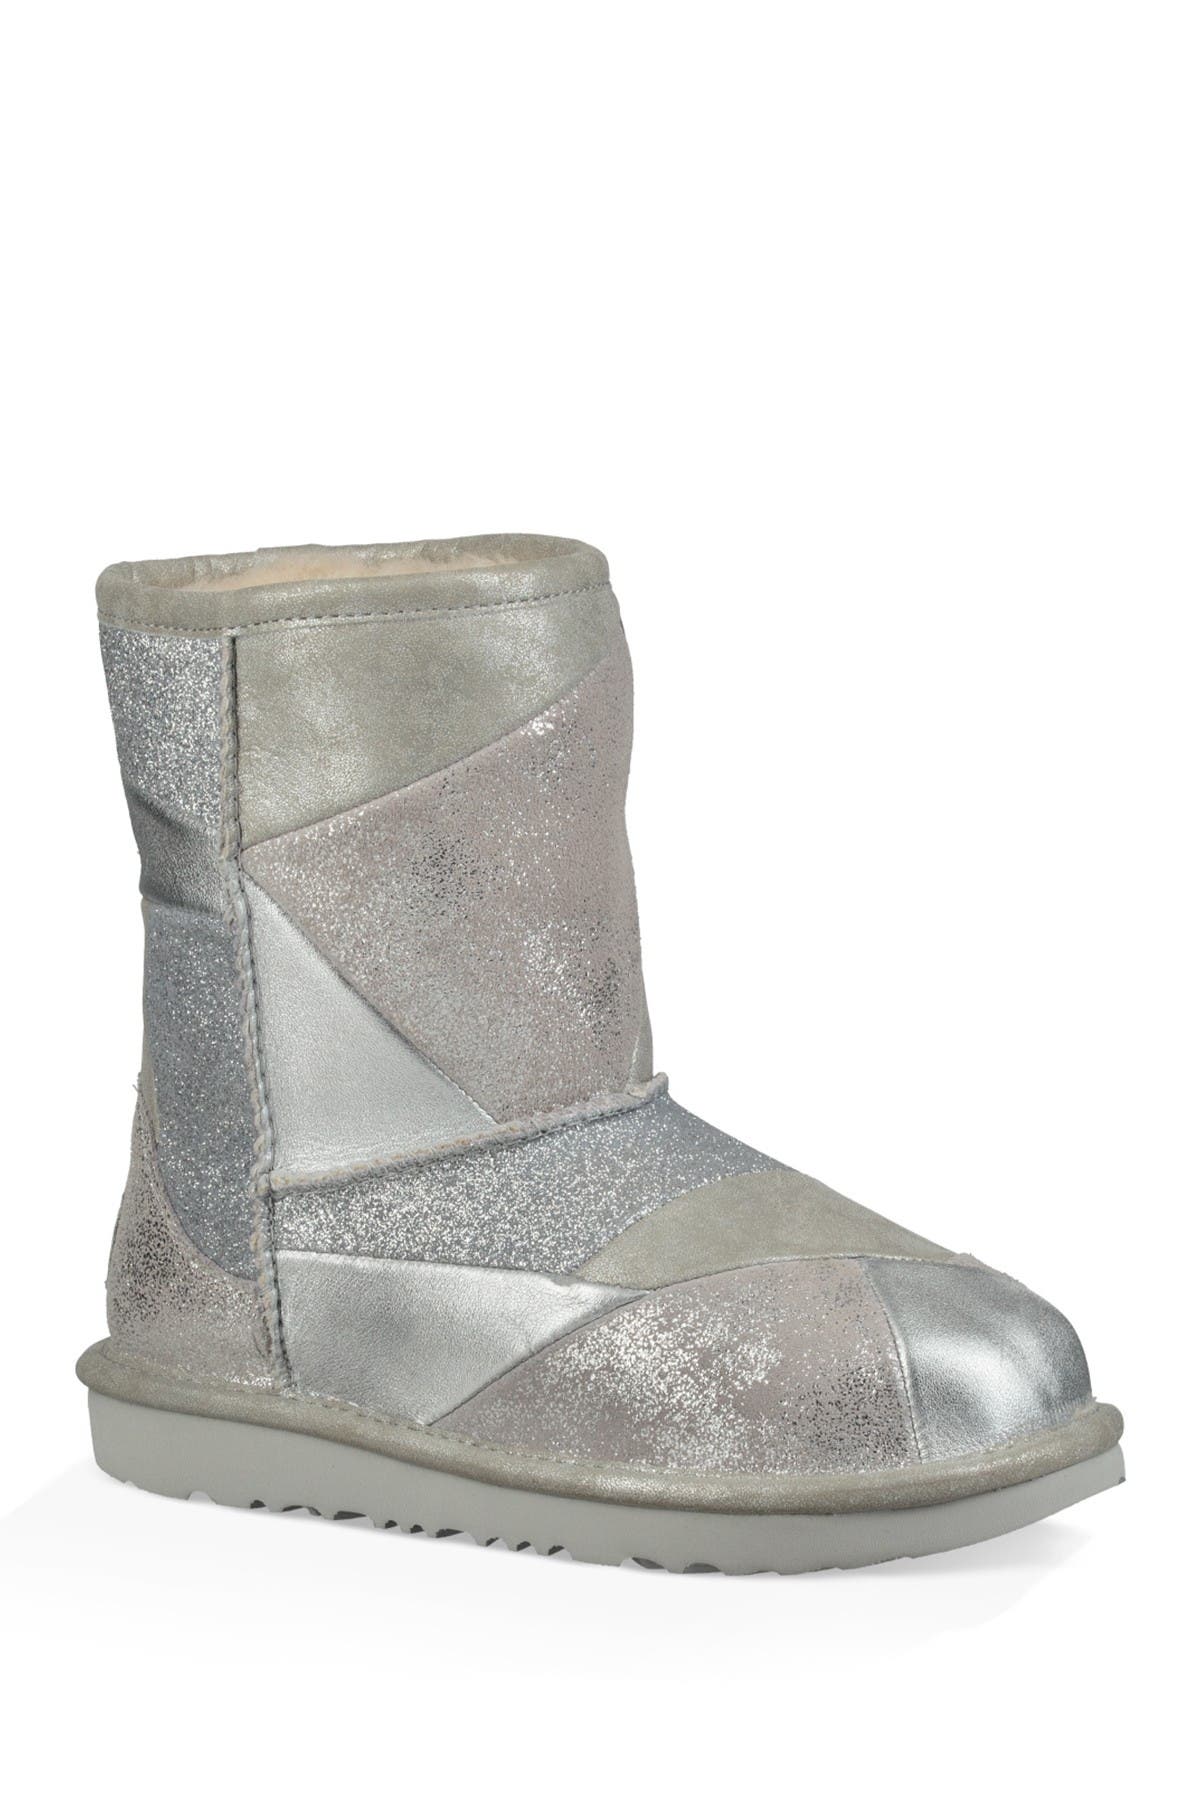 ugg classic patchwork